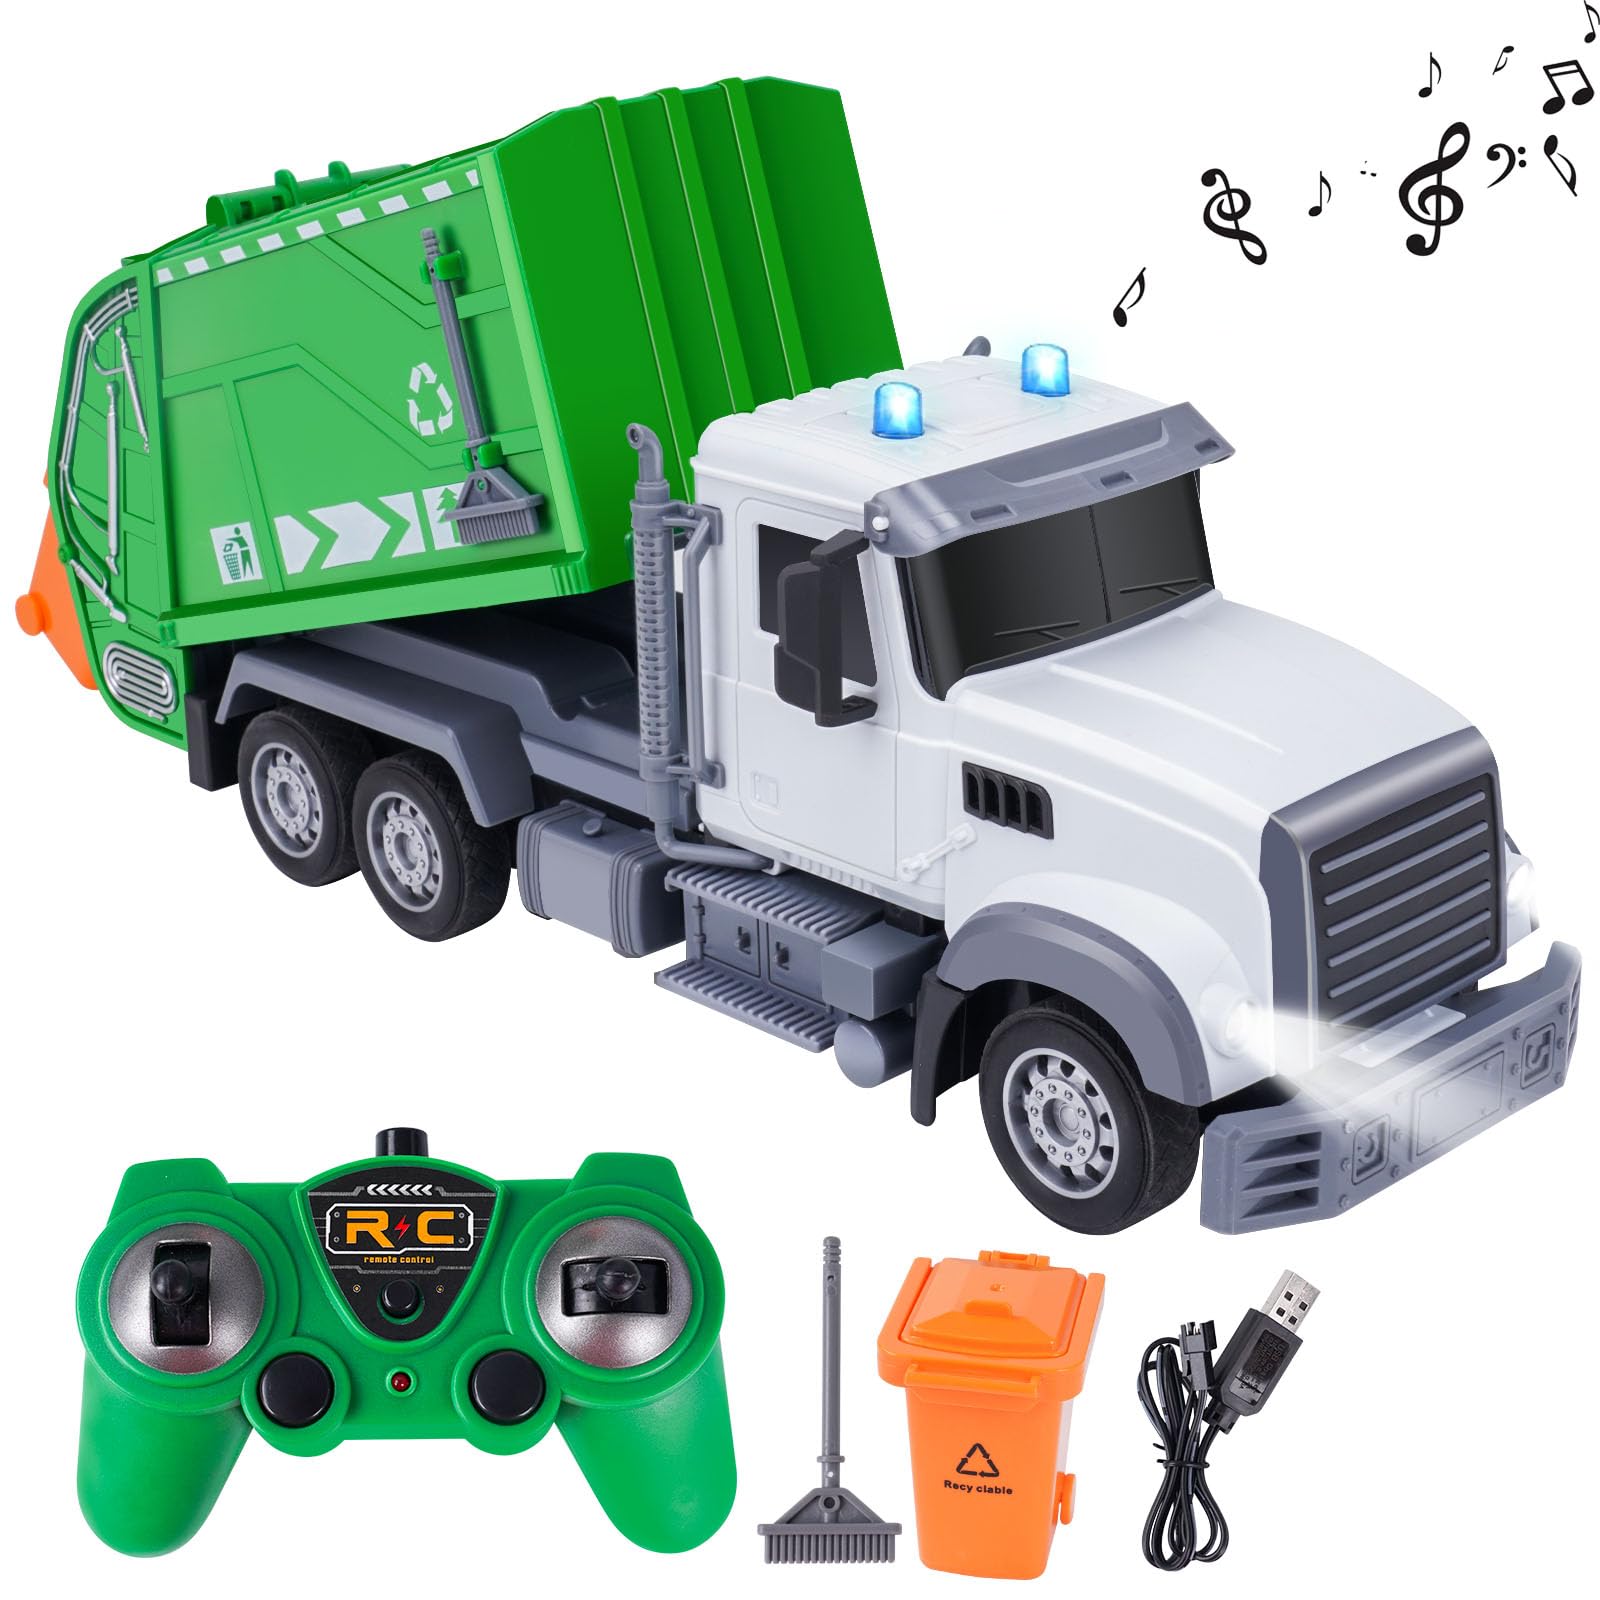 Hiitytin 2.4ghz Remote Control Garbage Truck Toys, 1:24 RC Recycling Trash Truck with Rechargeable Batteries, 6 Channel Rc Waste Management Garbage Truck & with Lights Gift for Kids Boys Girls 3+